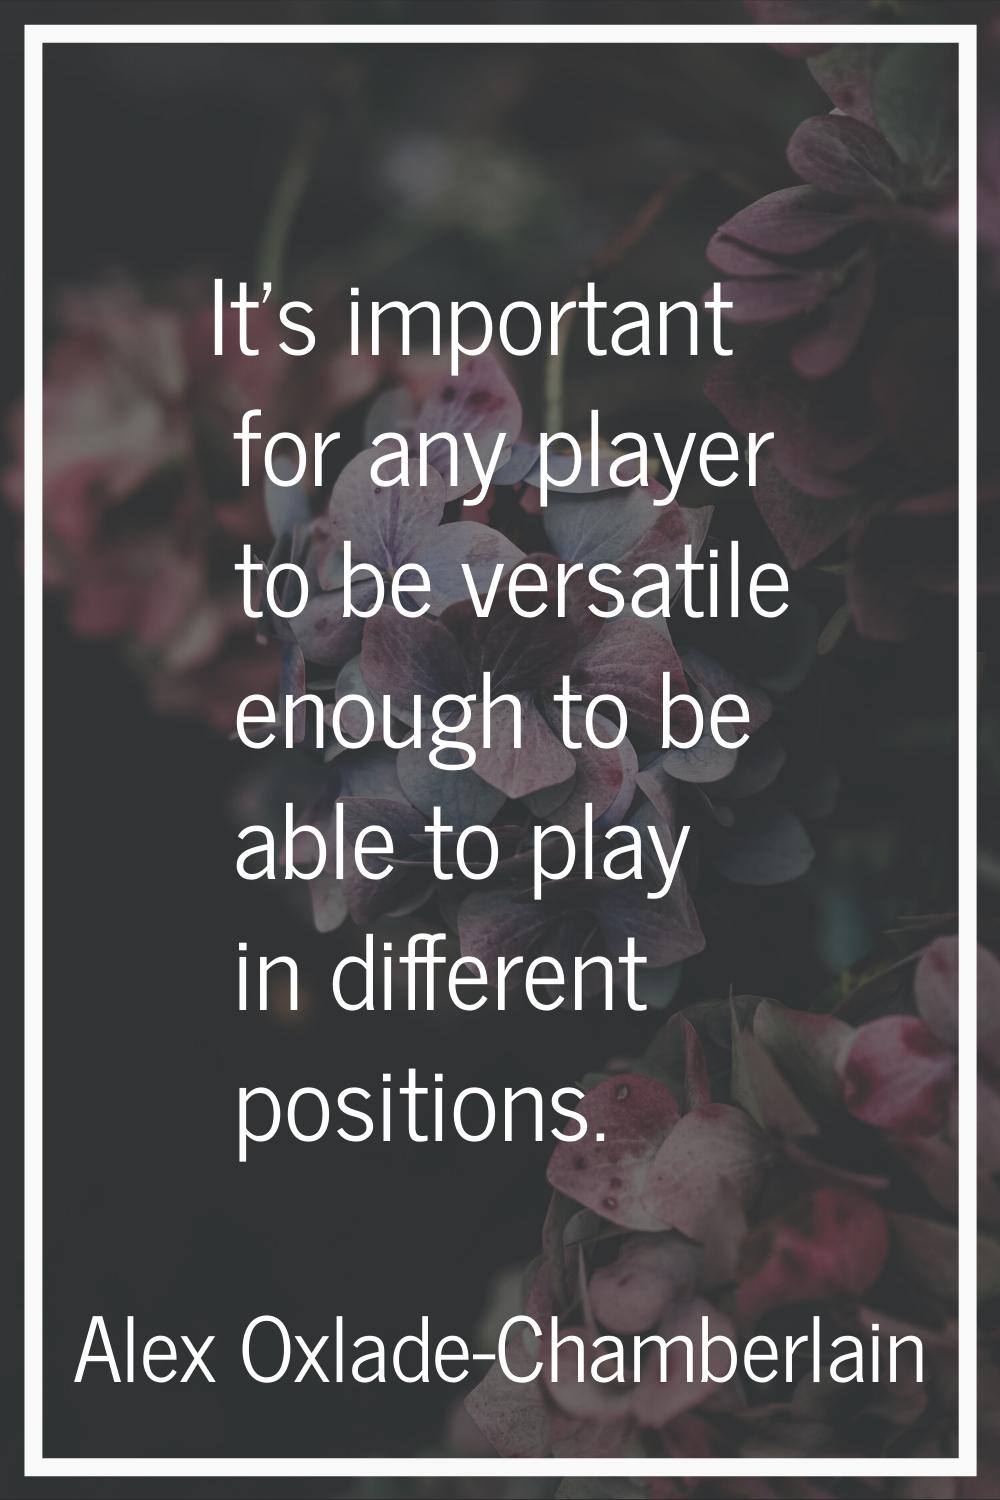 It's important for any player to be versatile enough to be able to play in different positions.